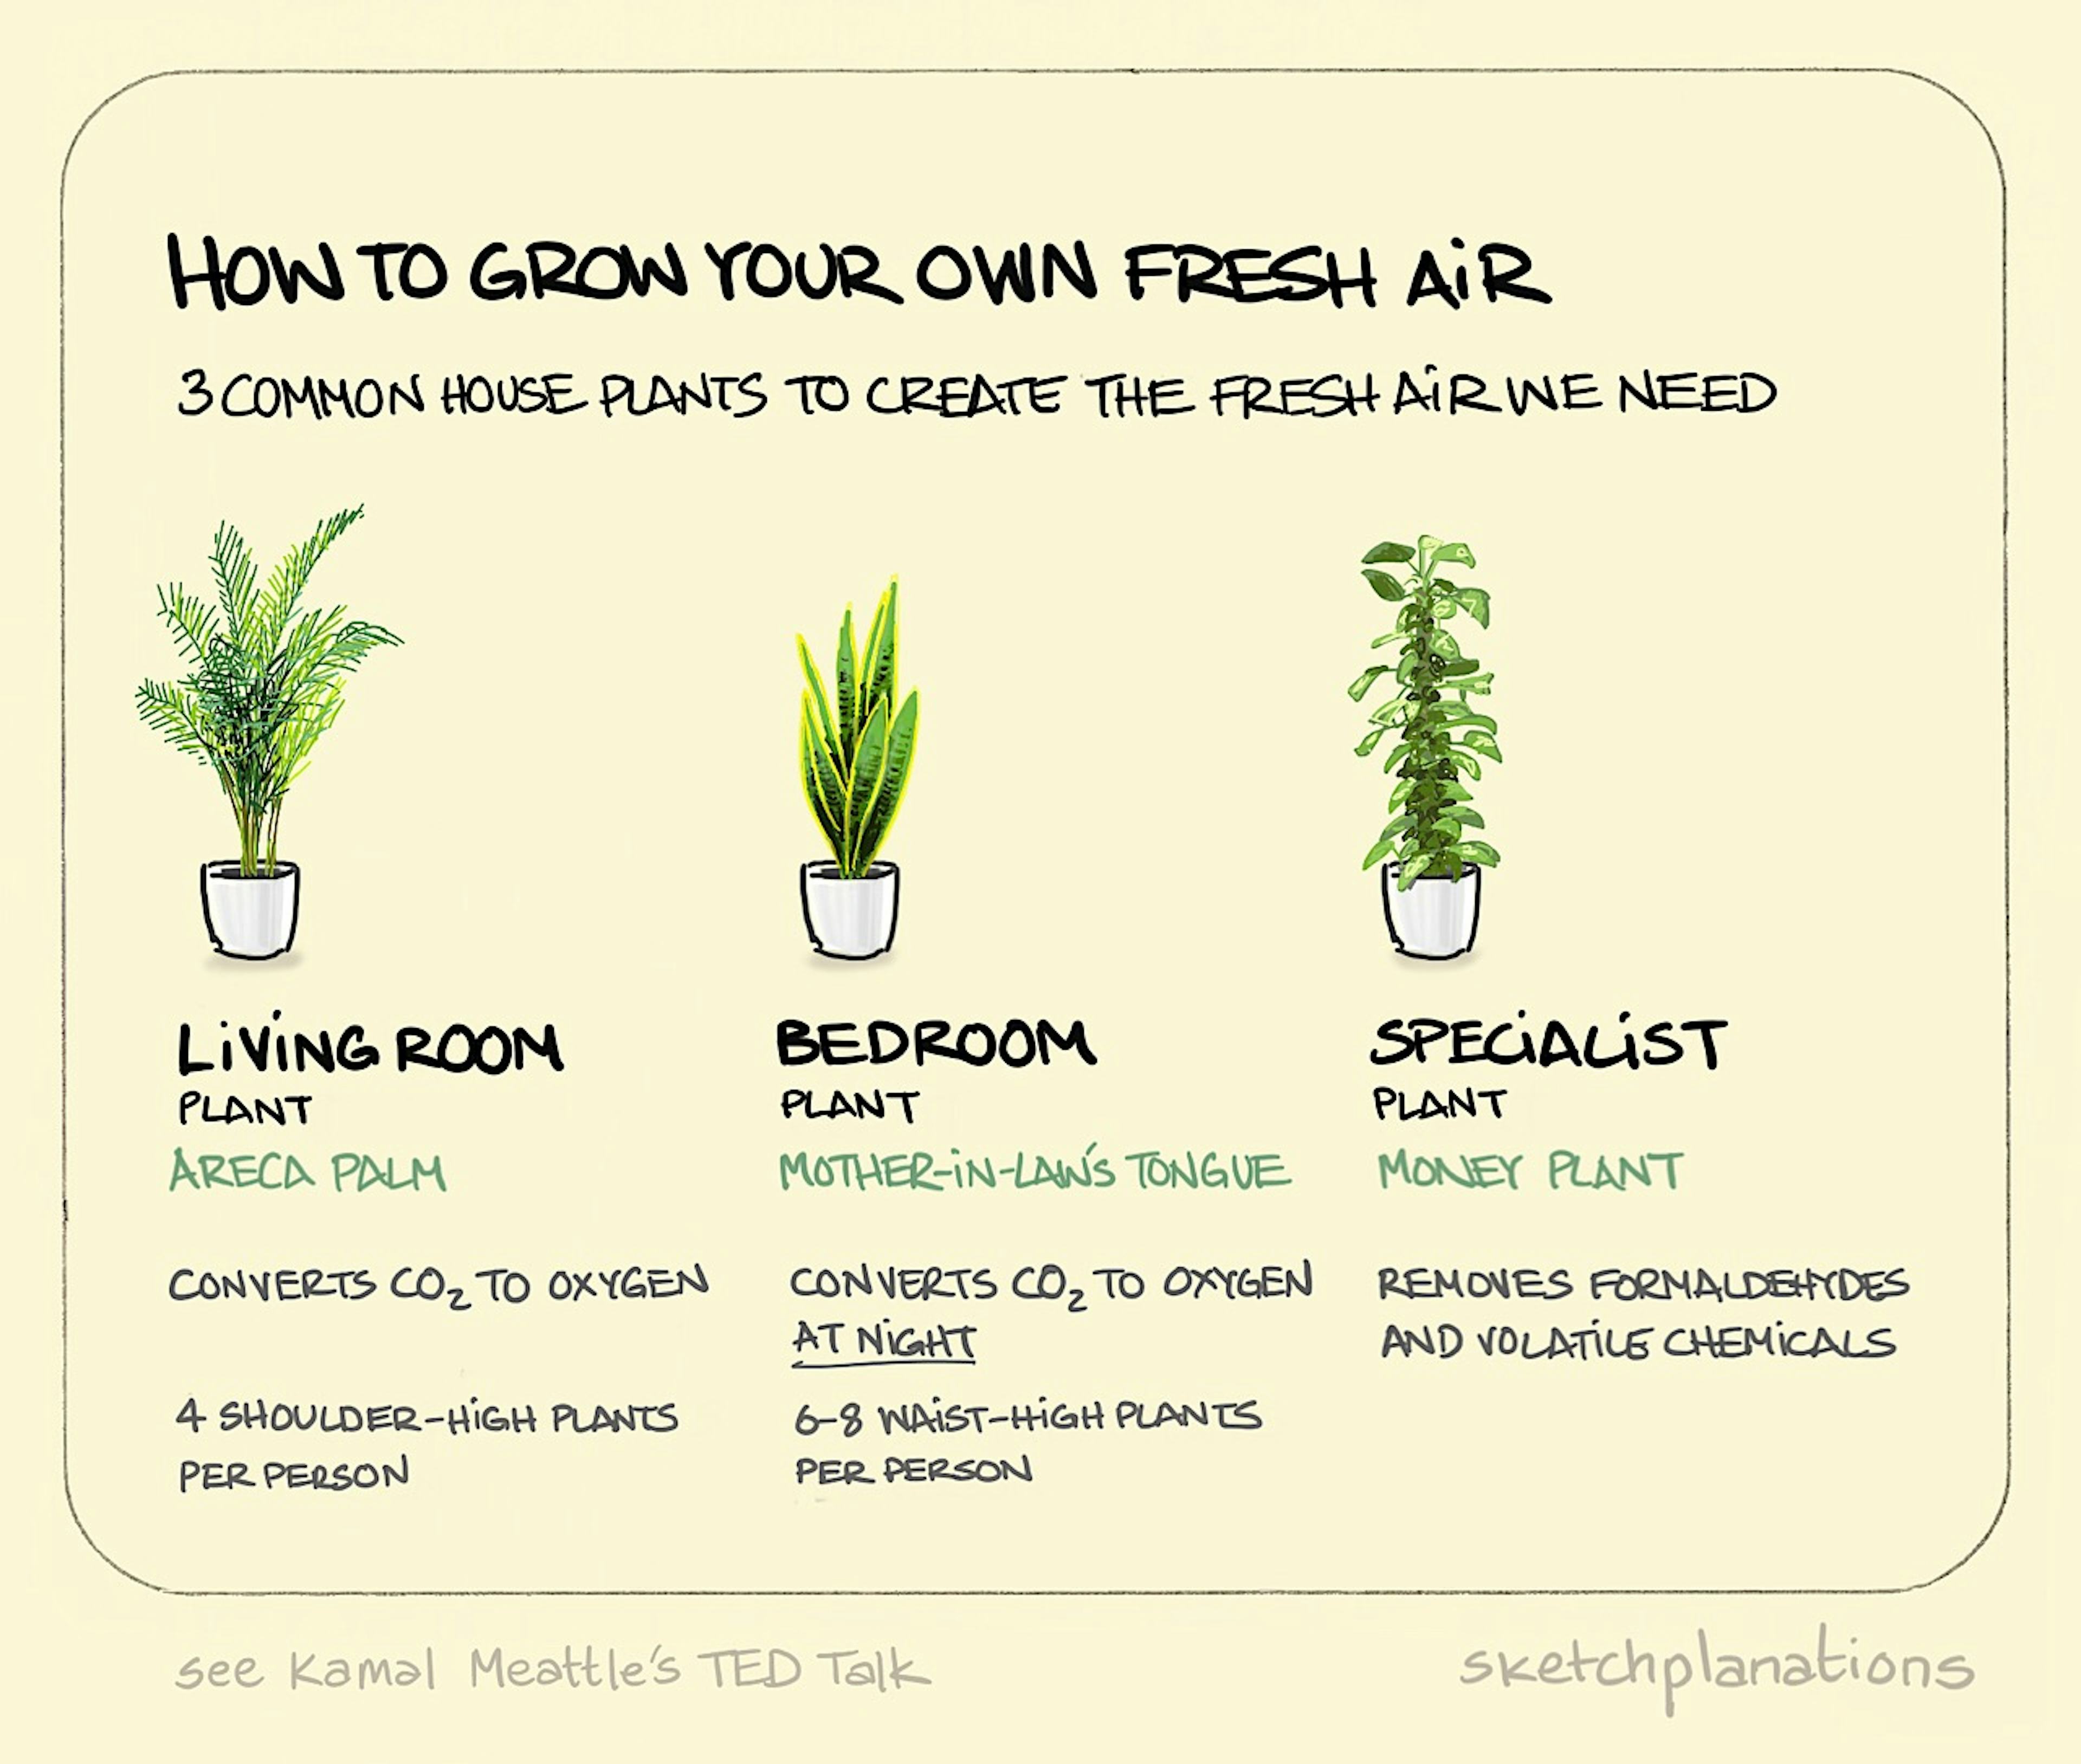 How to grow your own fresh air illustration: examples of common houseplants that help create an environment with relatively cleaner air; the Areca Palm, Mother-in-law's Tongue and the Money Plant.  